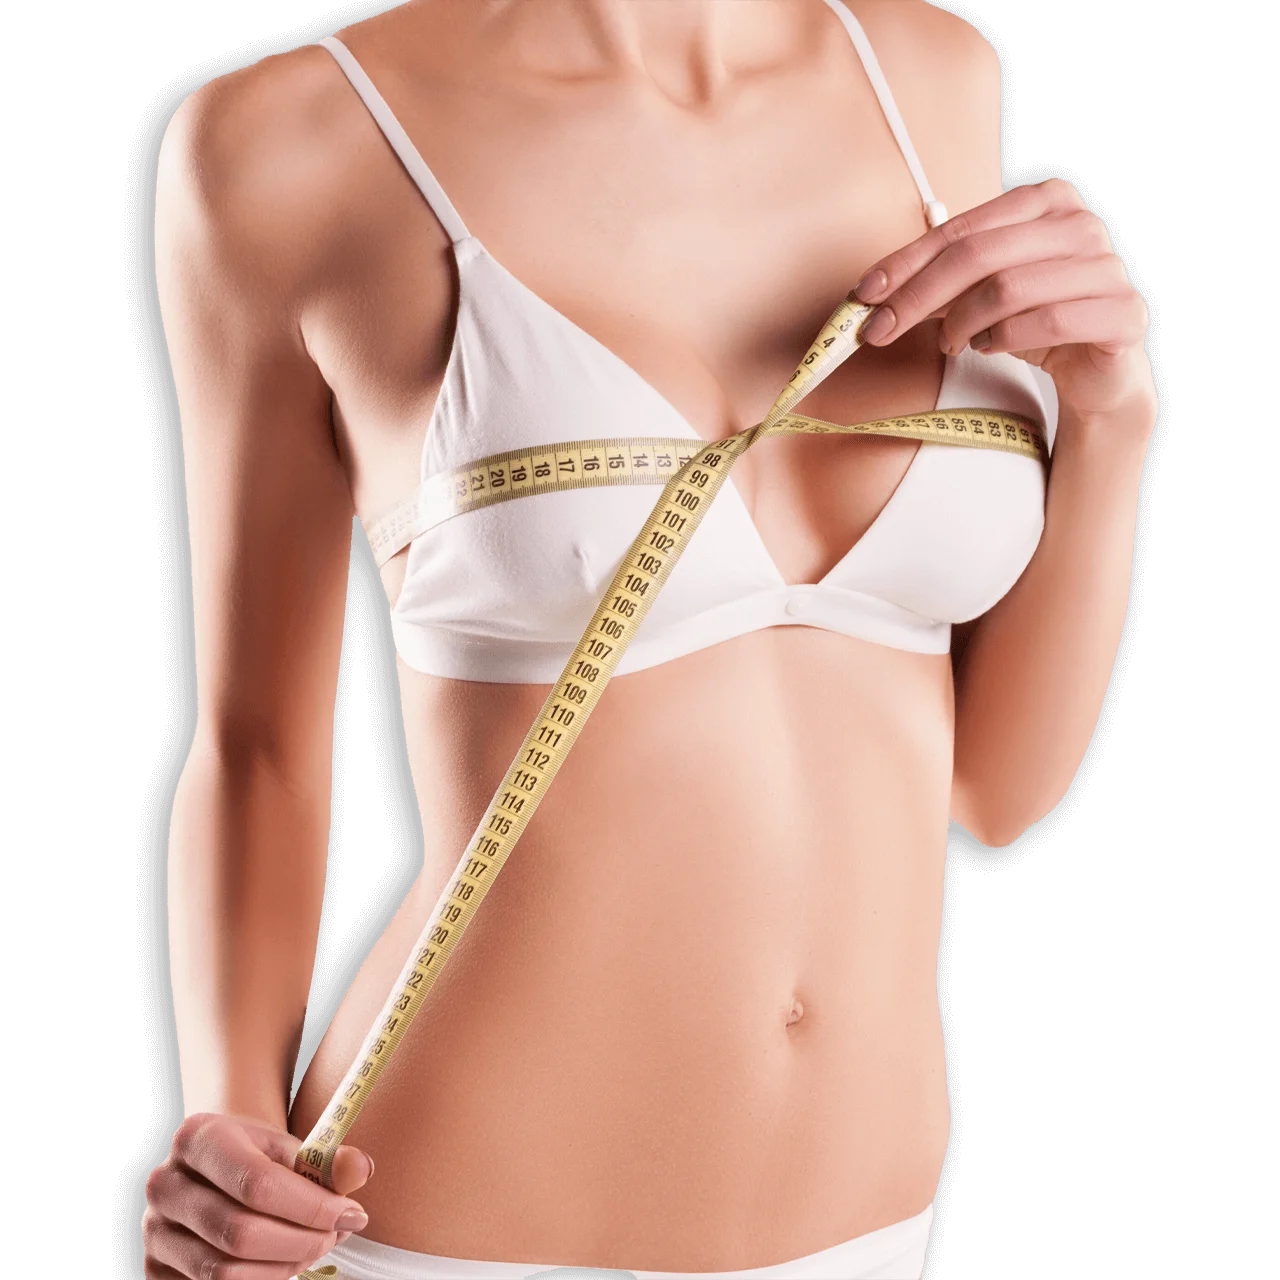 Advantages of Breast Reduction